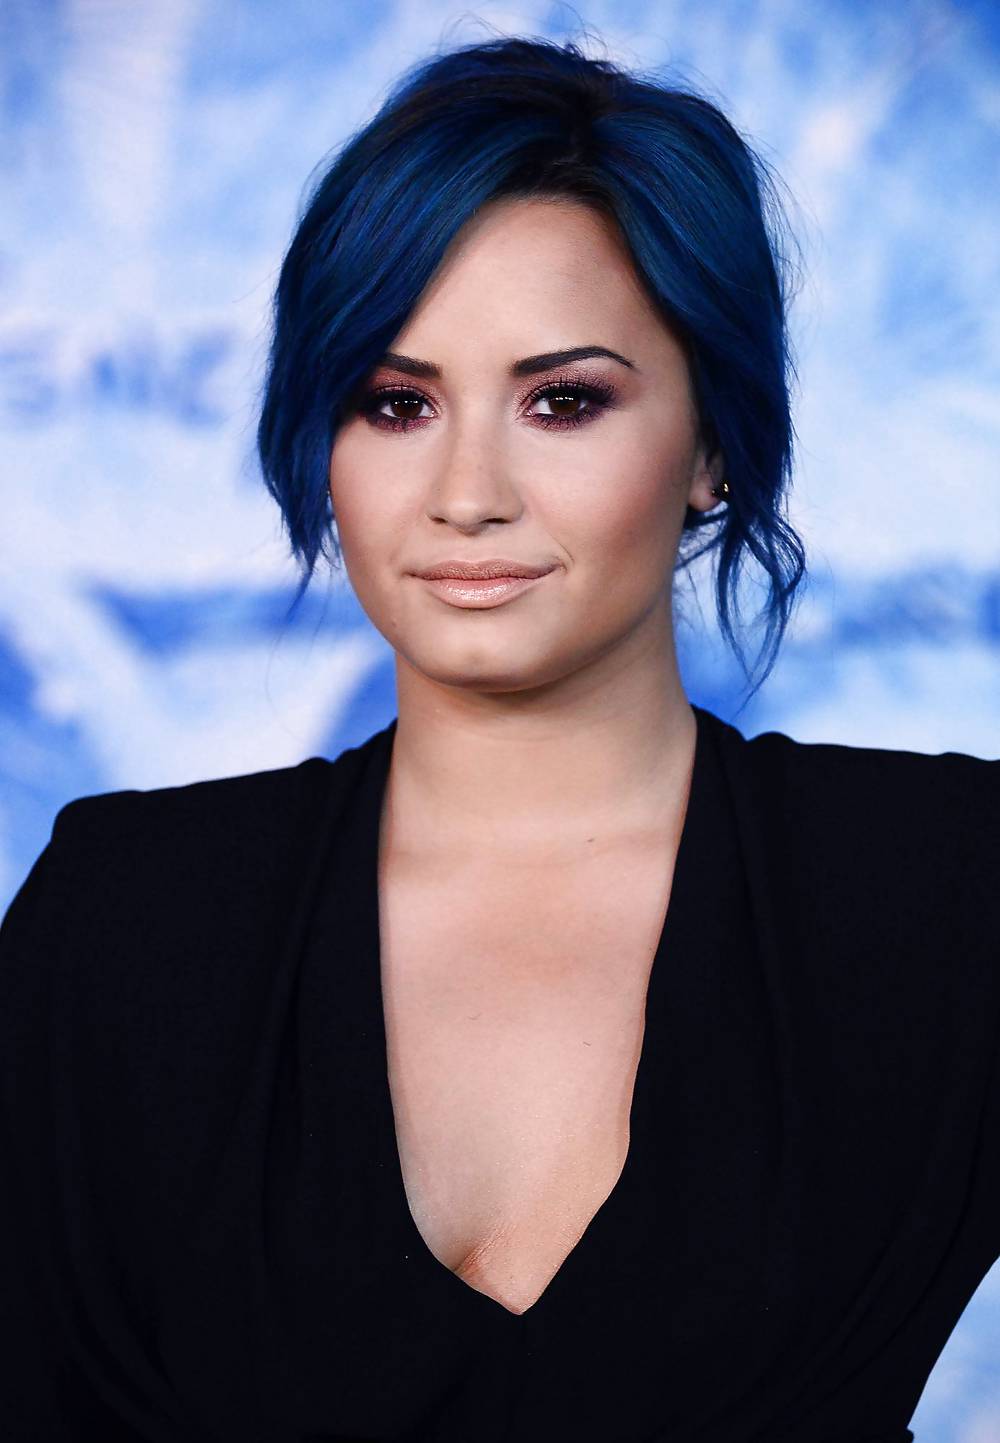 Demi Lovato with blue hair and business style #22180224